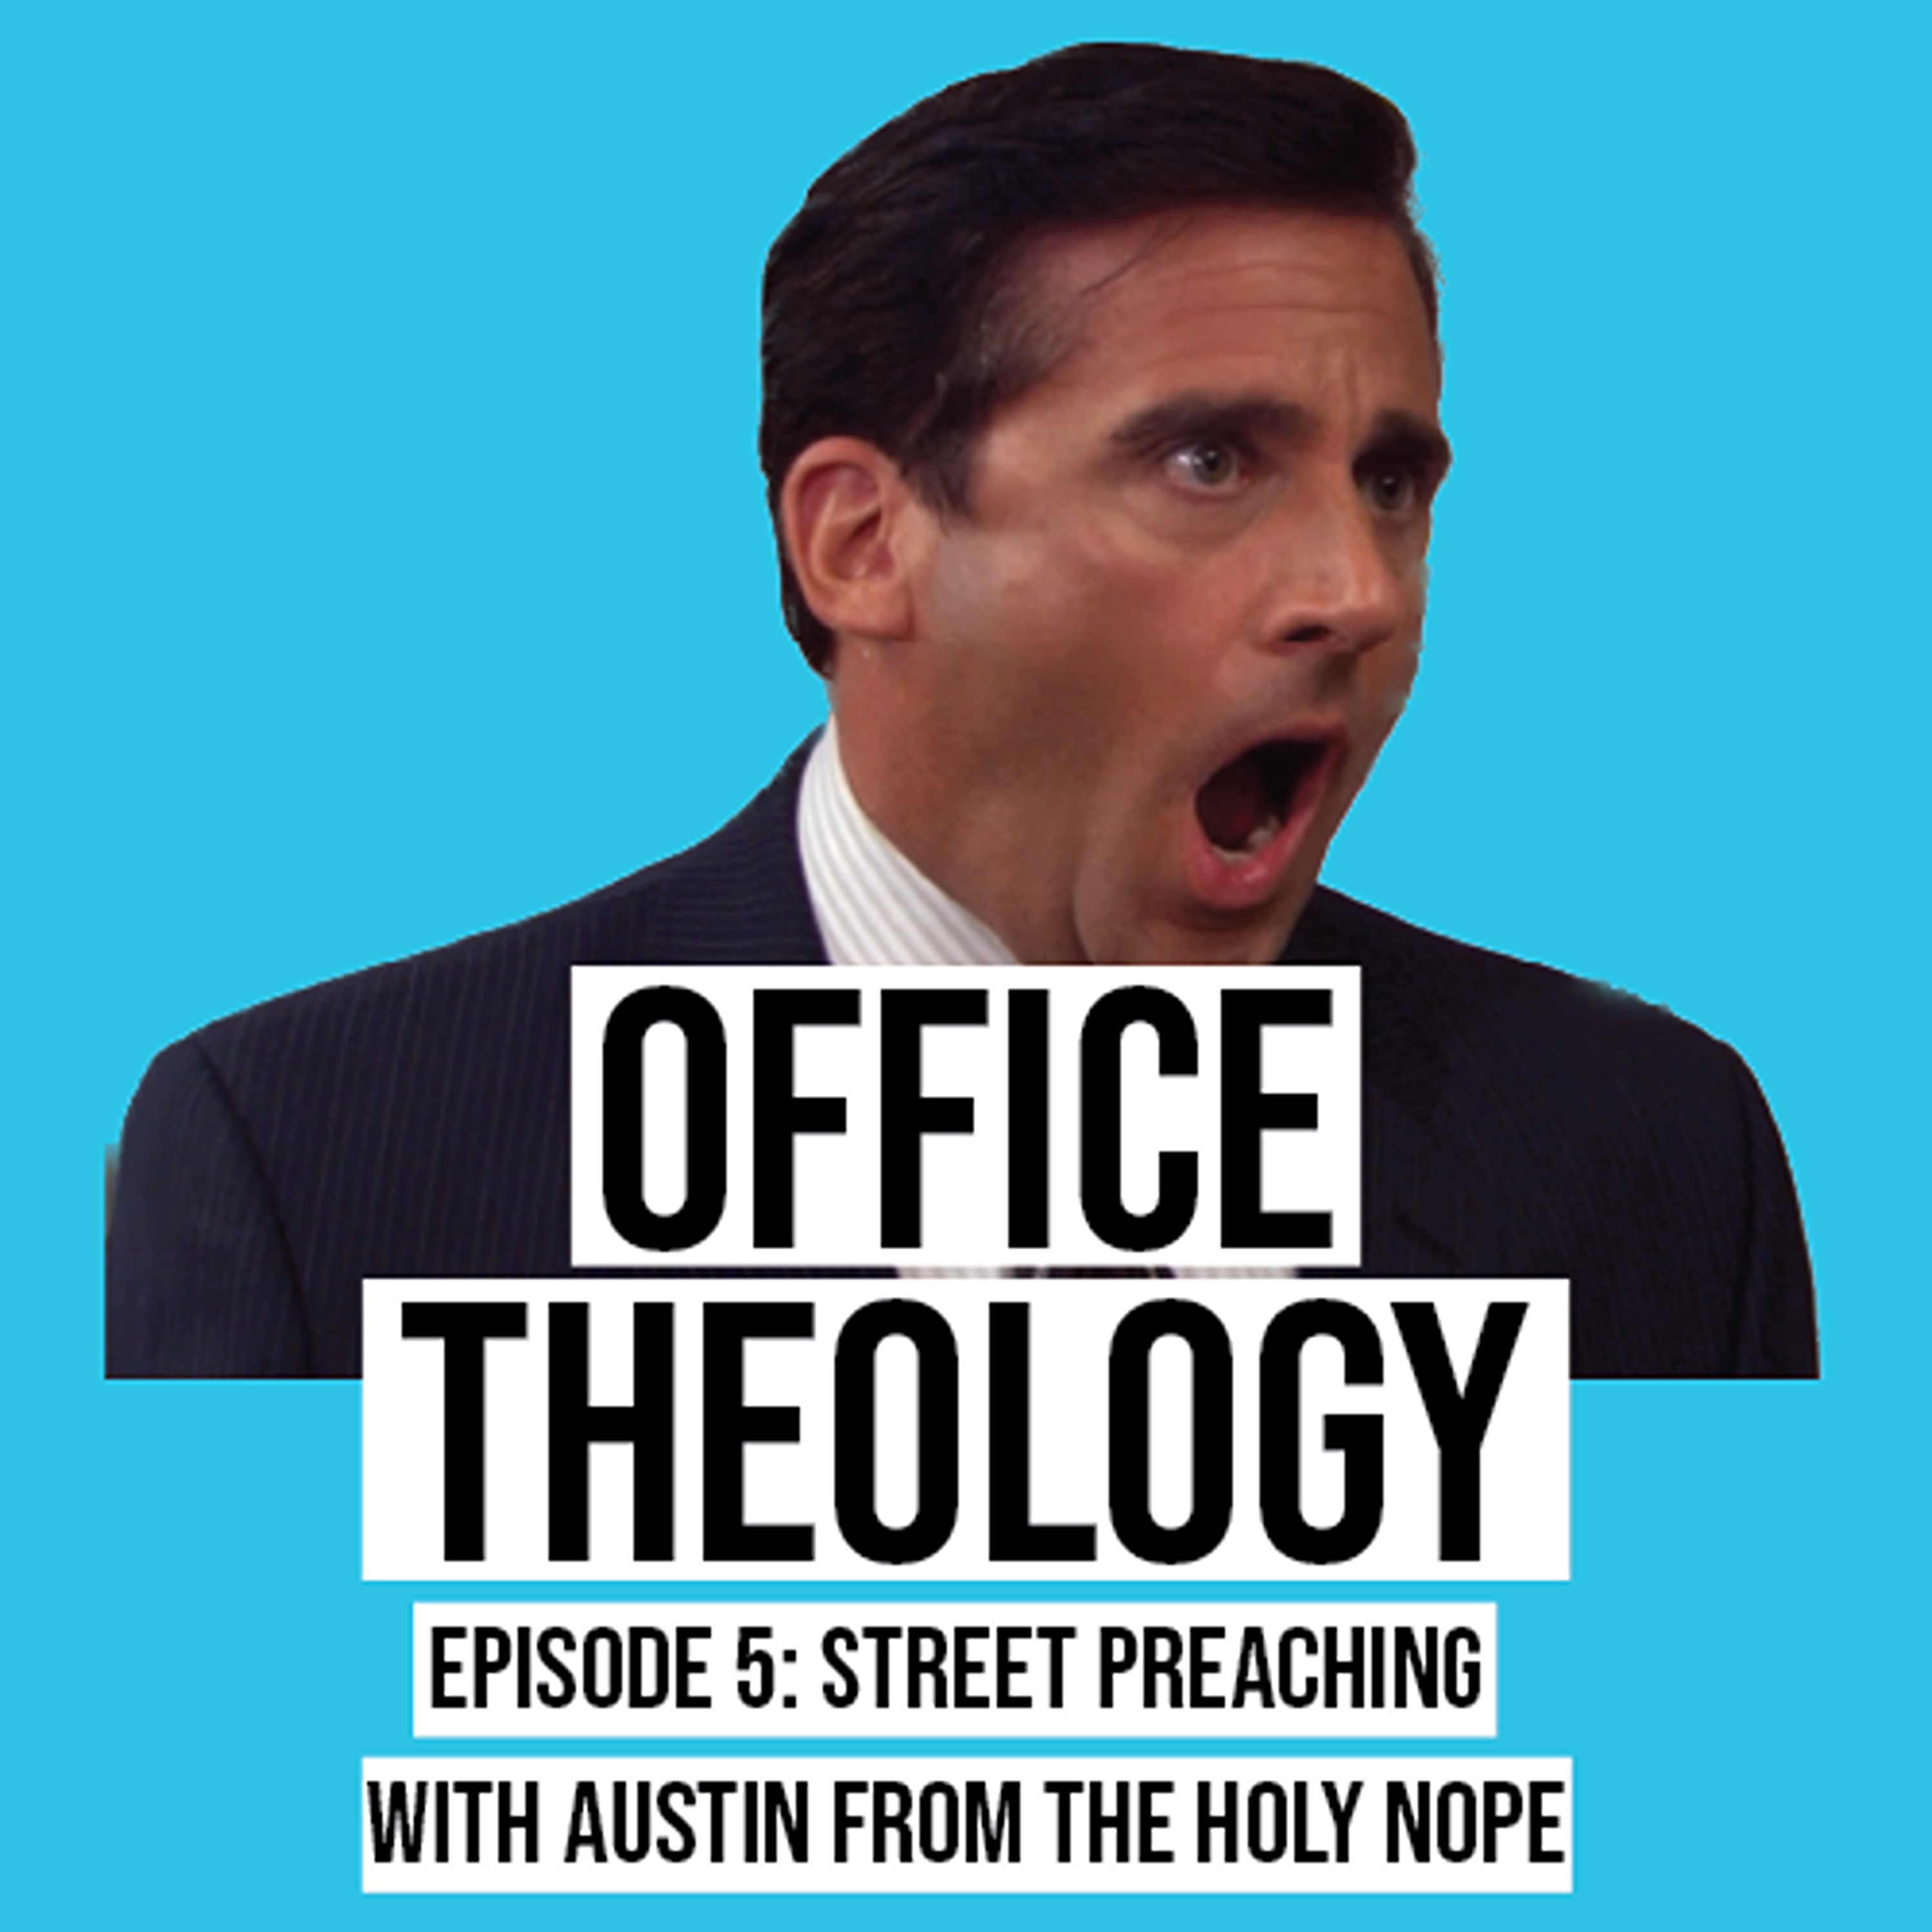 Episode 5: Street Preaching with Austin from The Holy Nope